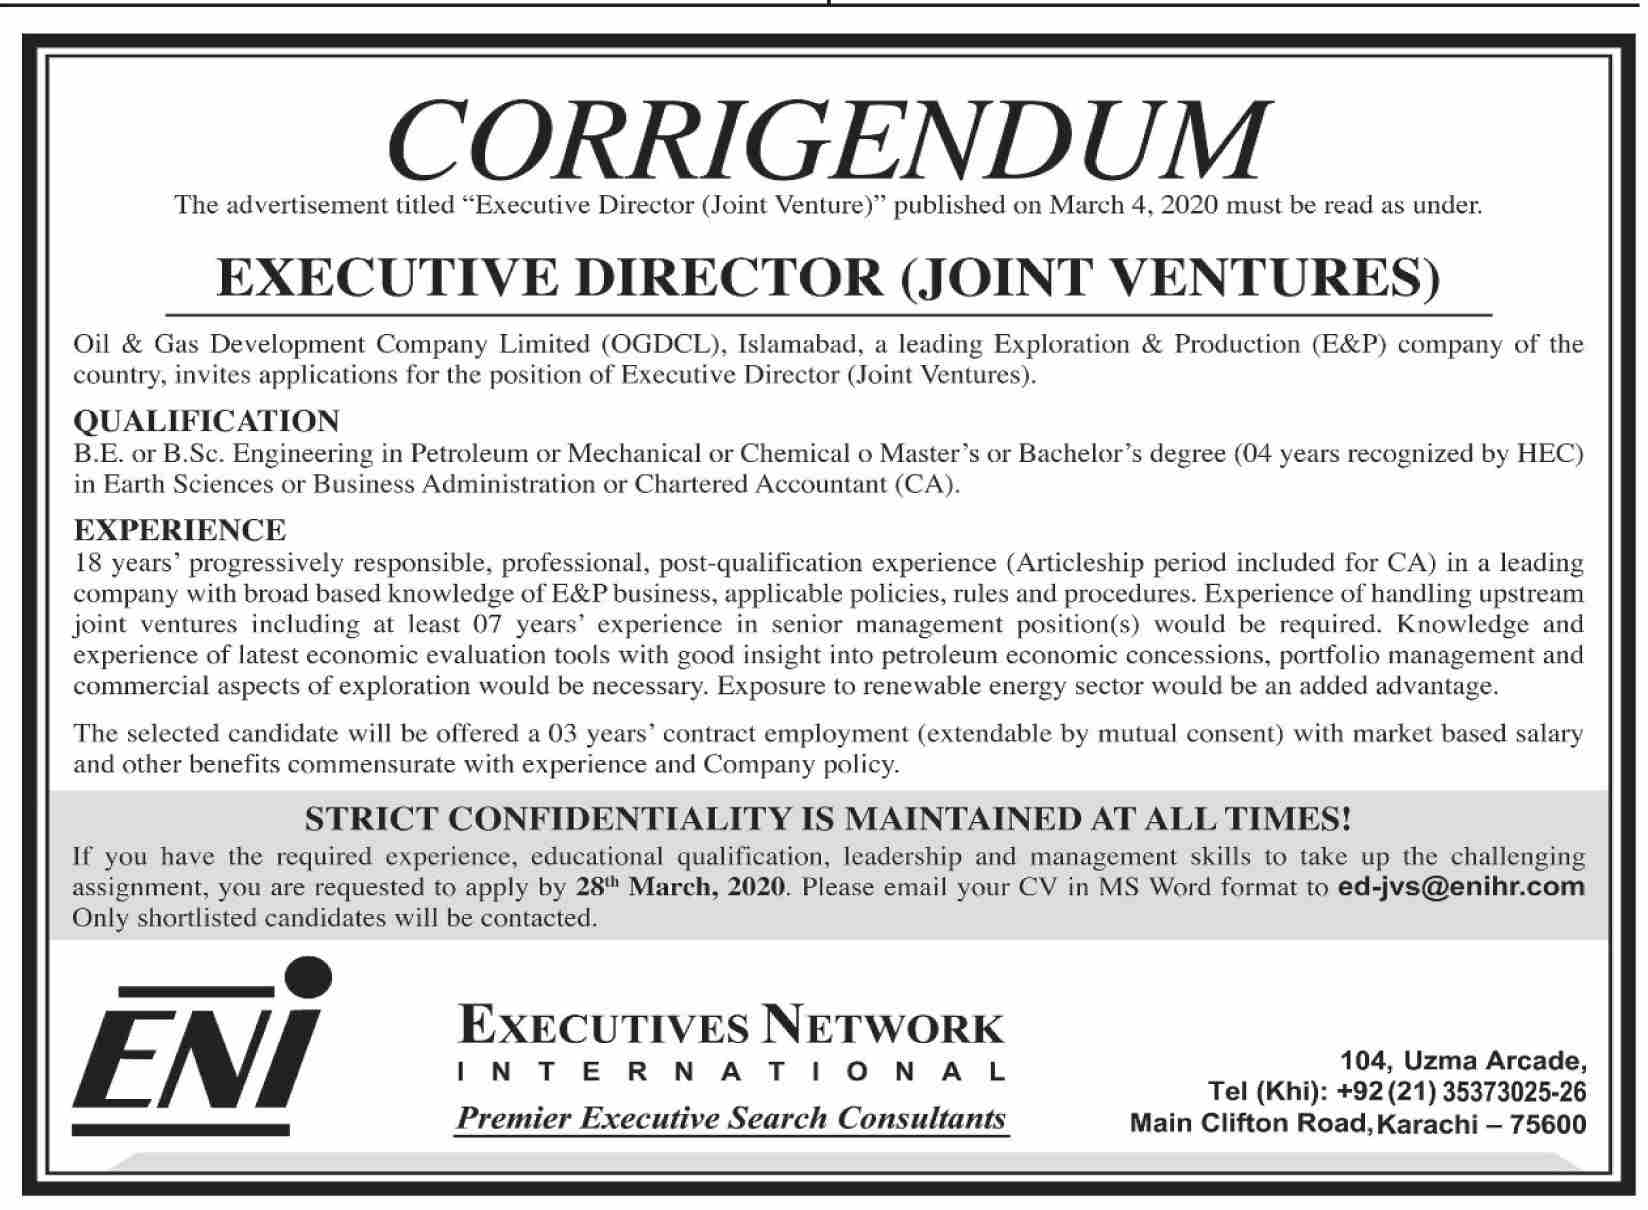 Executive Director Required In Executive Network International ENI 21 March 2020